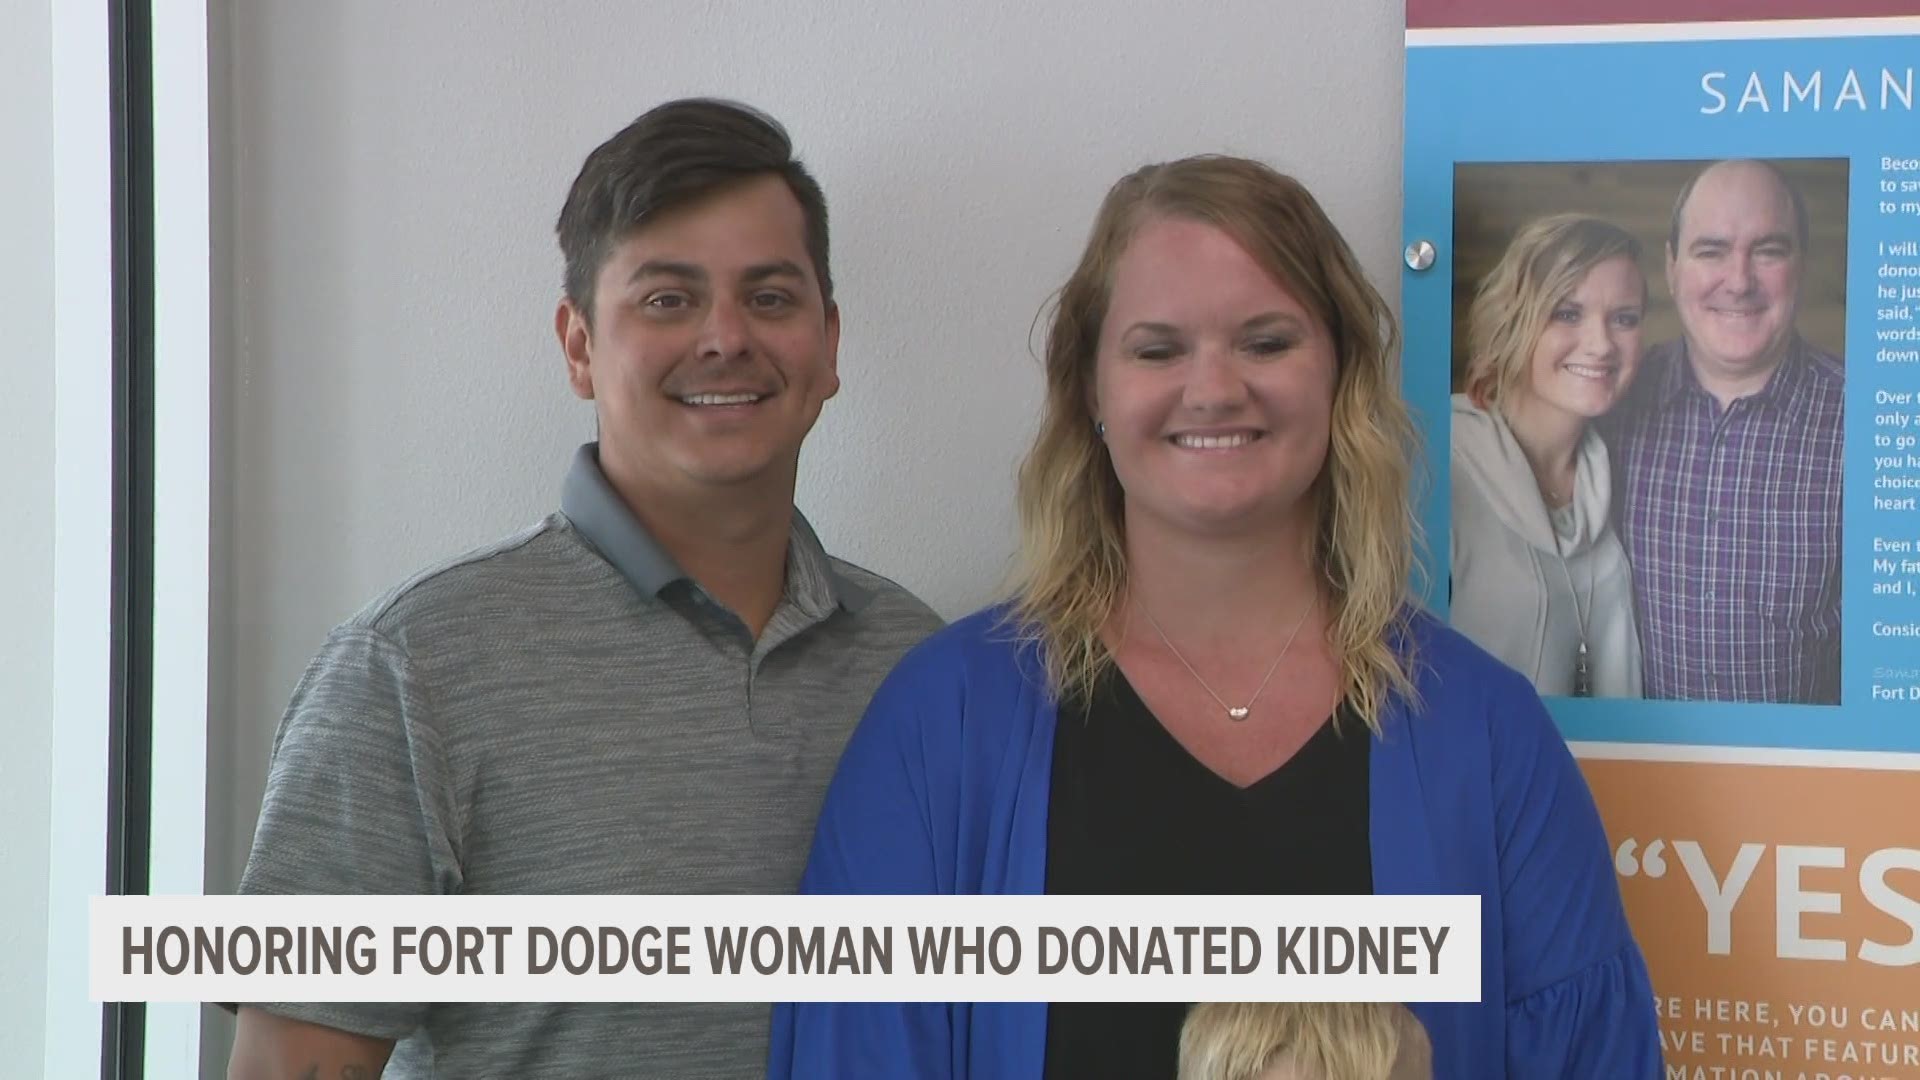 Samantha Reeves donated her kidney. Now the Iowa DOT honored that gift by dedicating a permanent plaque at the Fort Dodge Driver's License Service Center.